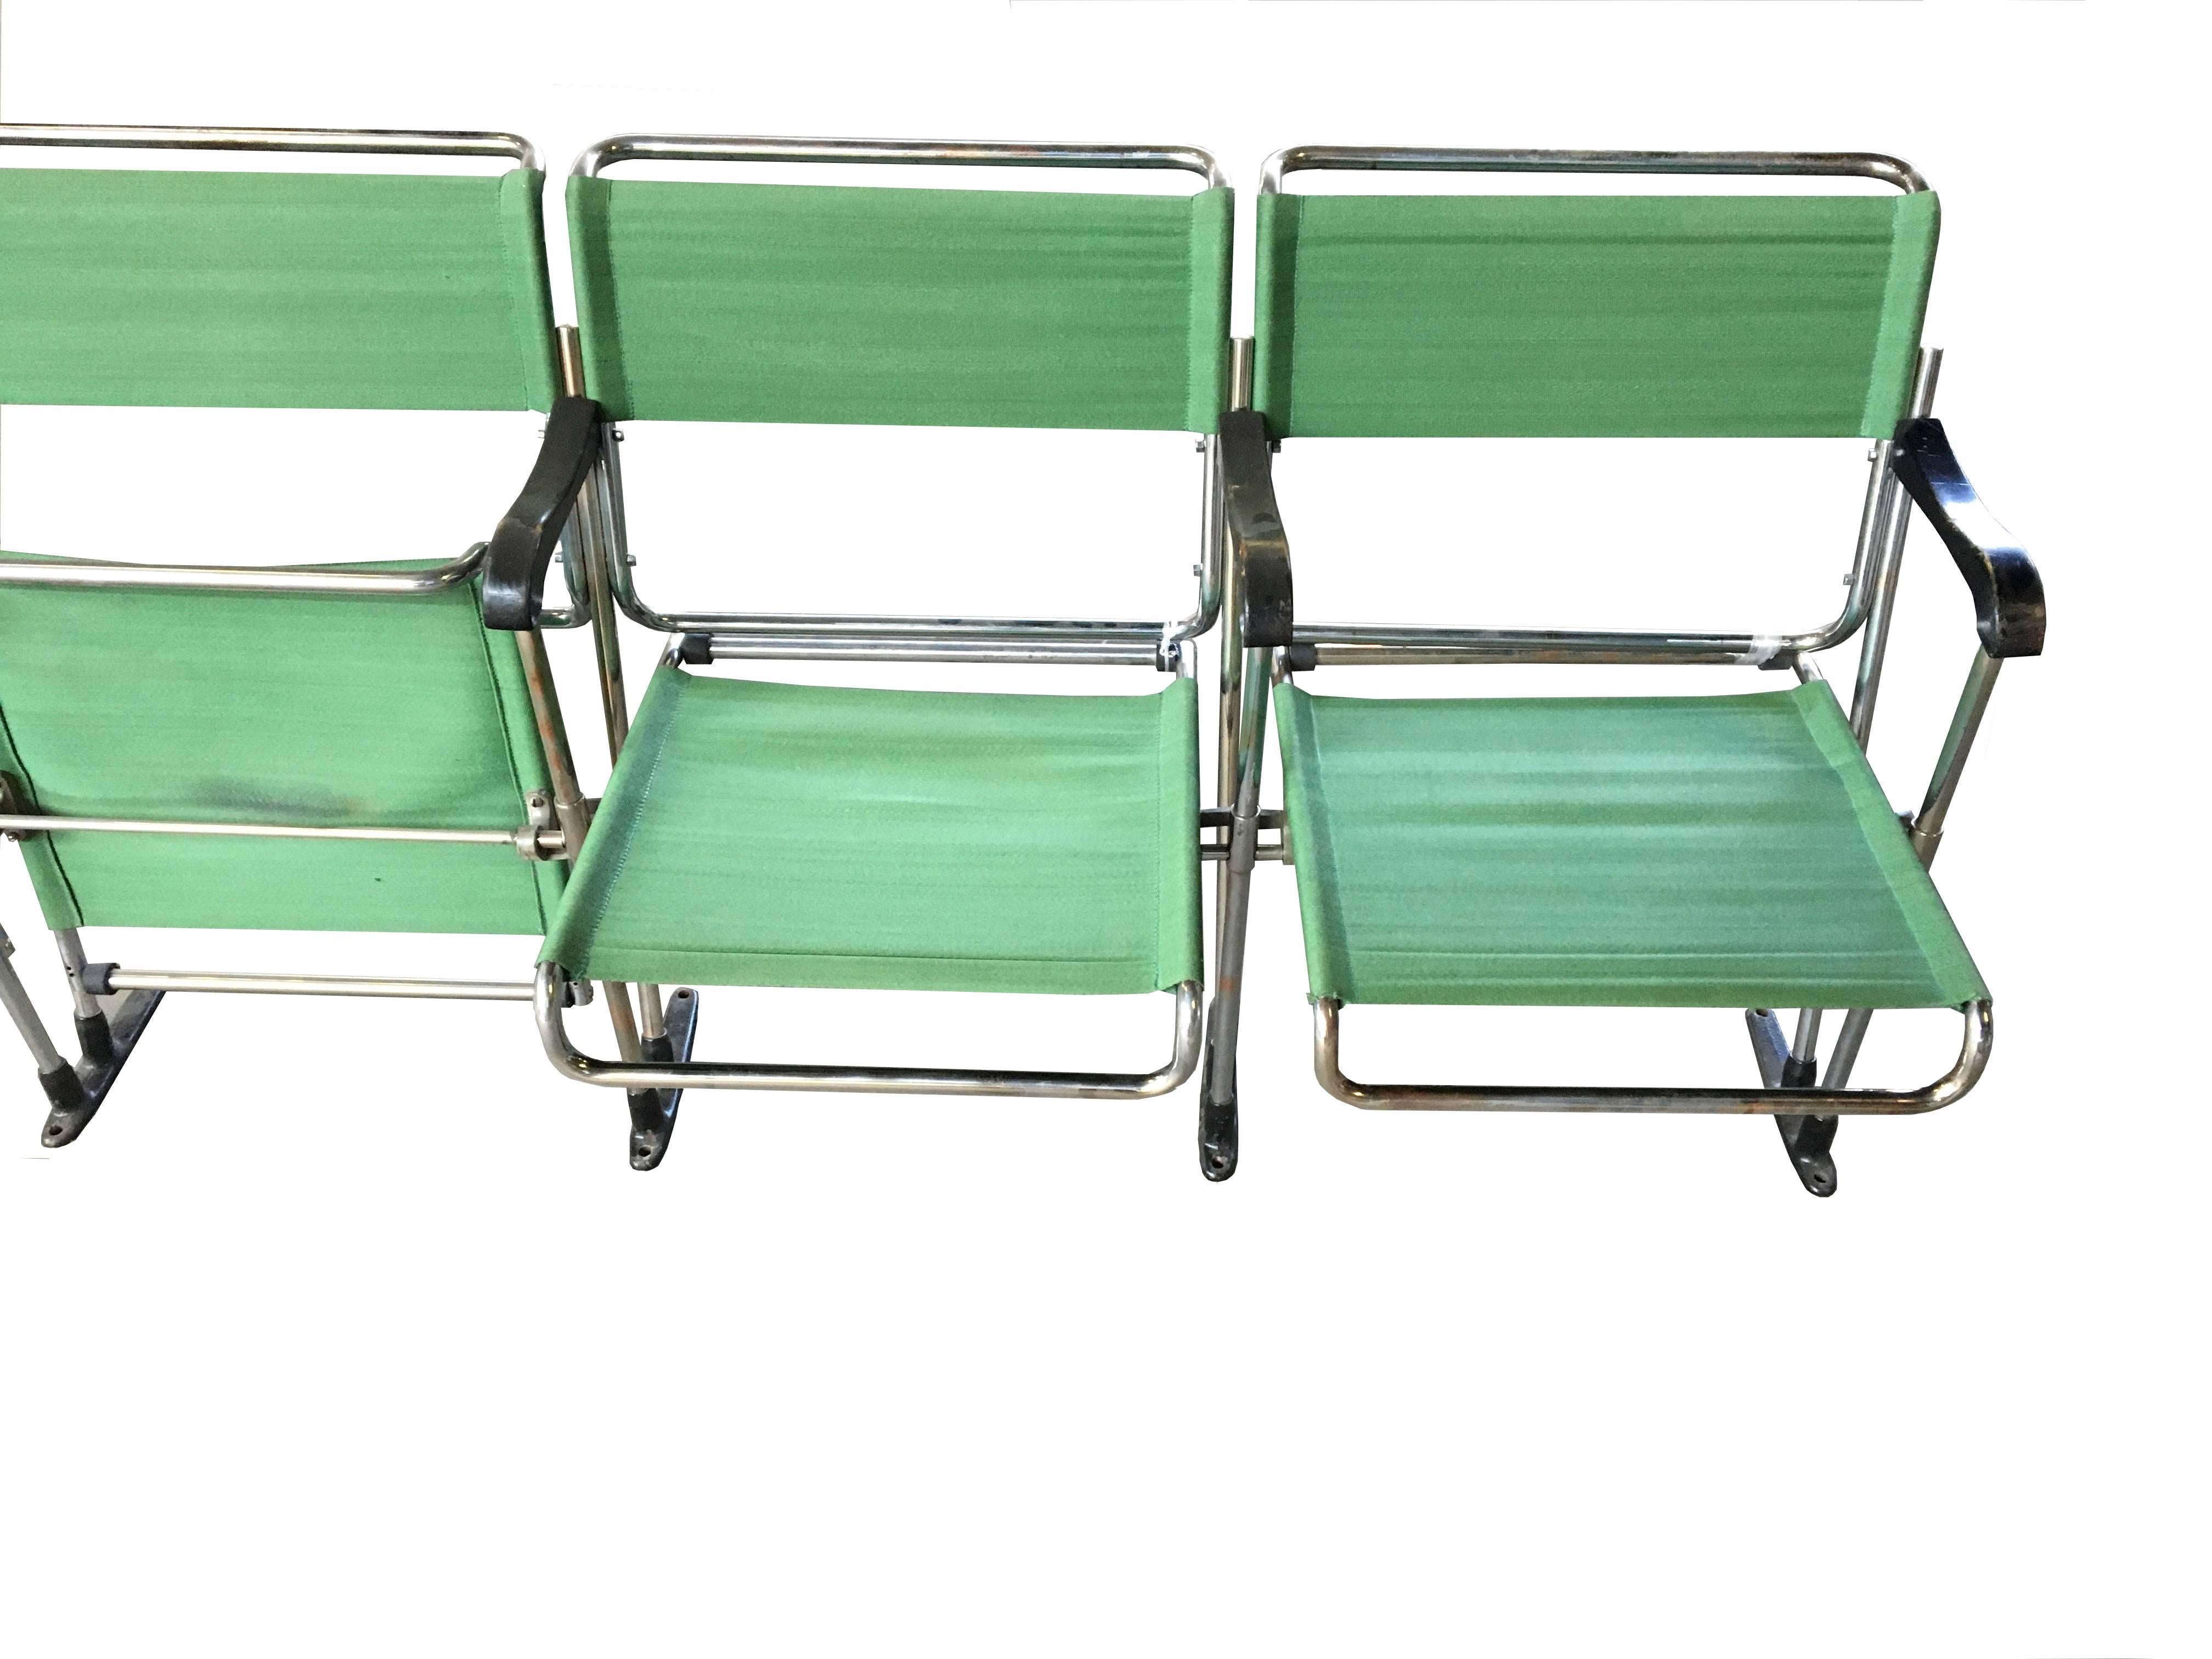 16 Sections of Marcel Breuer designed theater chairs that were part of the Andy Warhol Museum. Five chairs per section. Designed in 1928-1929 and produced by Thonet. Each section contains five chairs. Designed to be bolted to the floor. 

Ten of